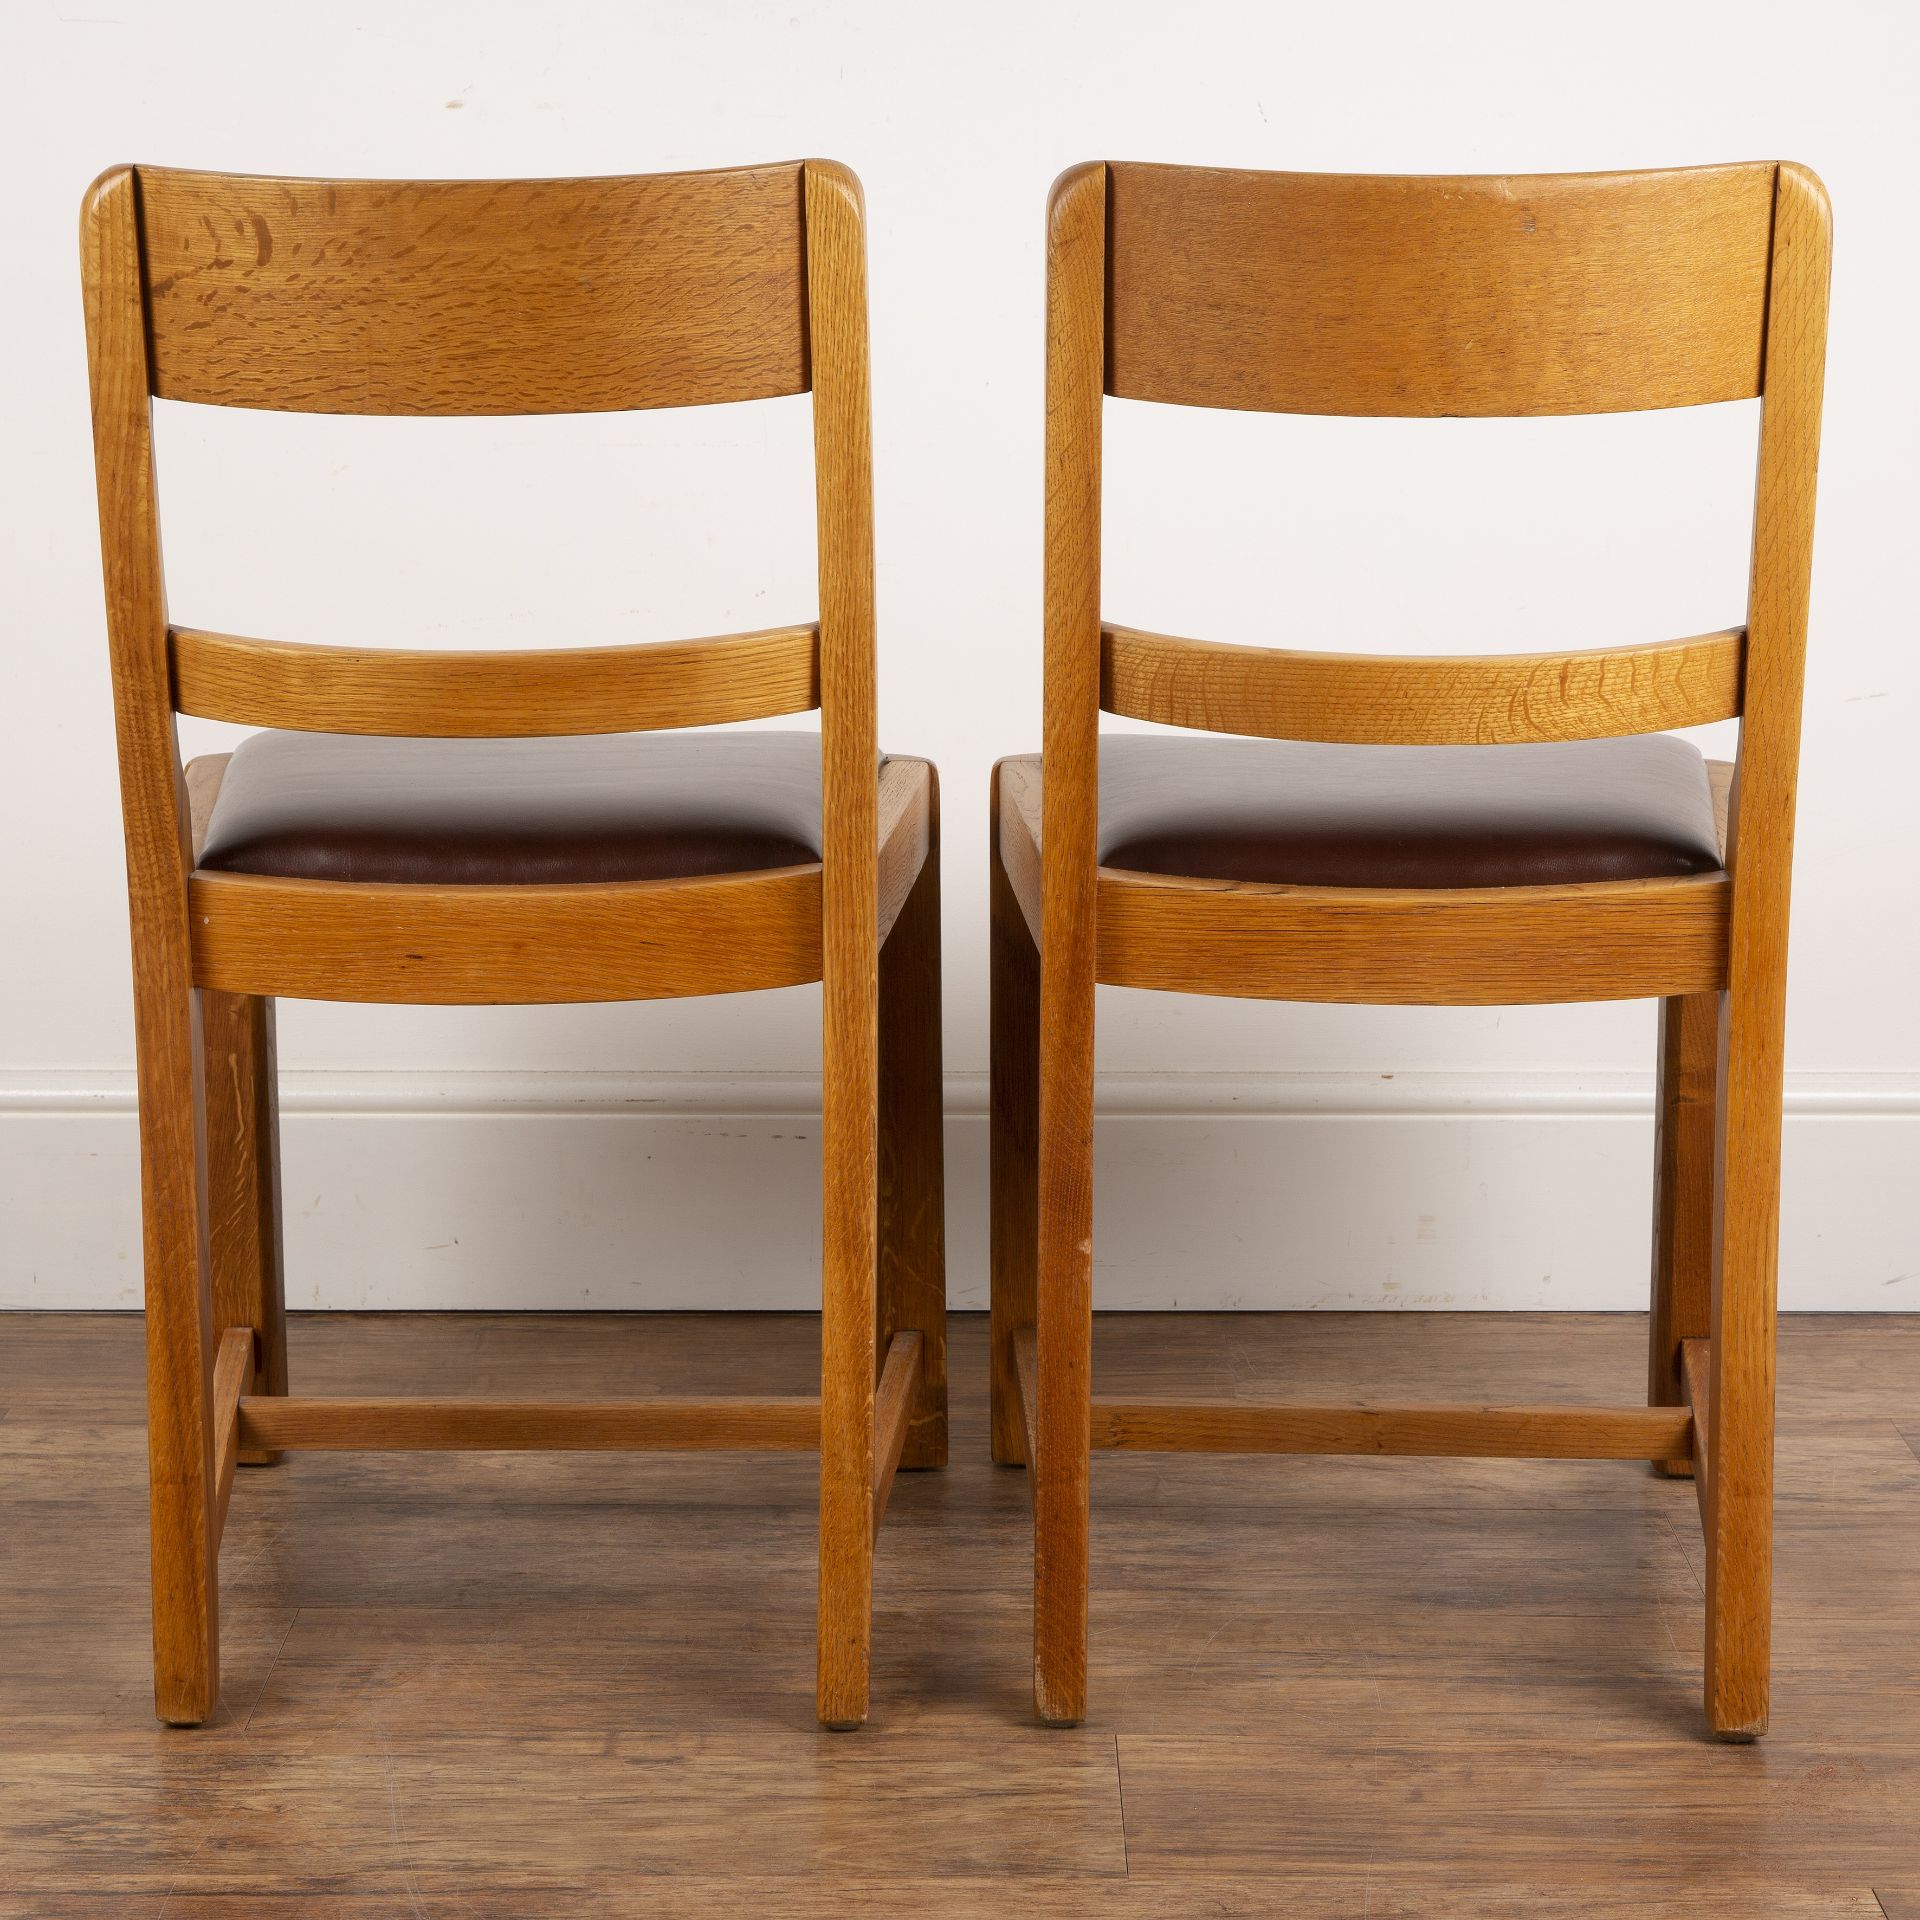 Attributed to Heals pair of oak-framed chairs with bar backs, reupholstered red seats, with stylised - Image 2 of 2